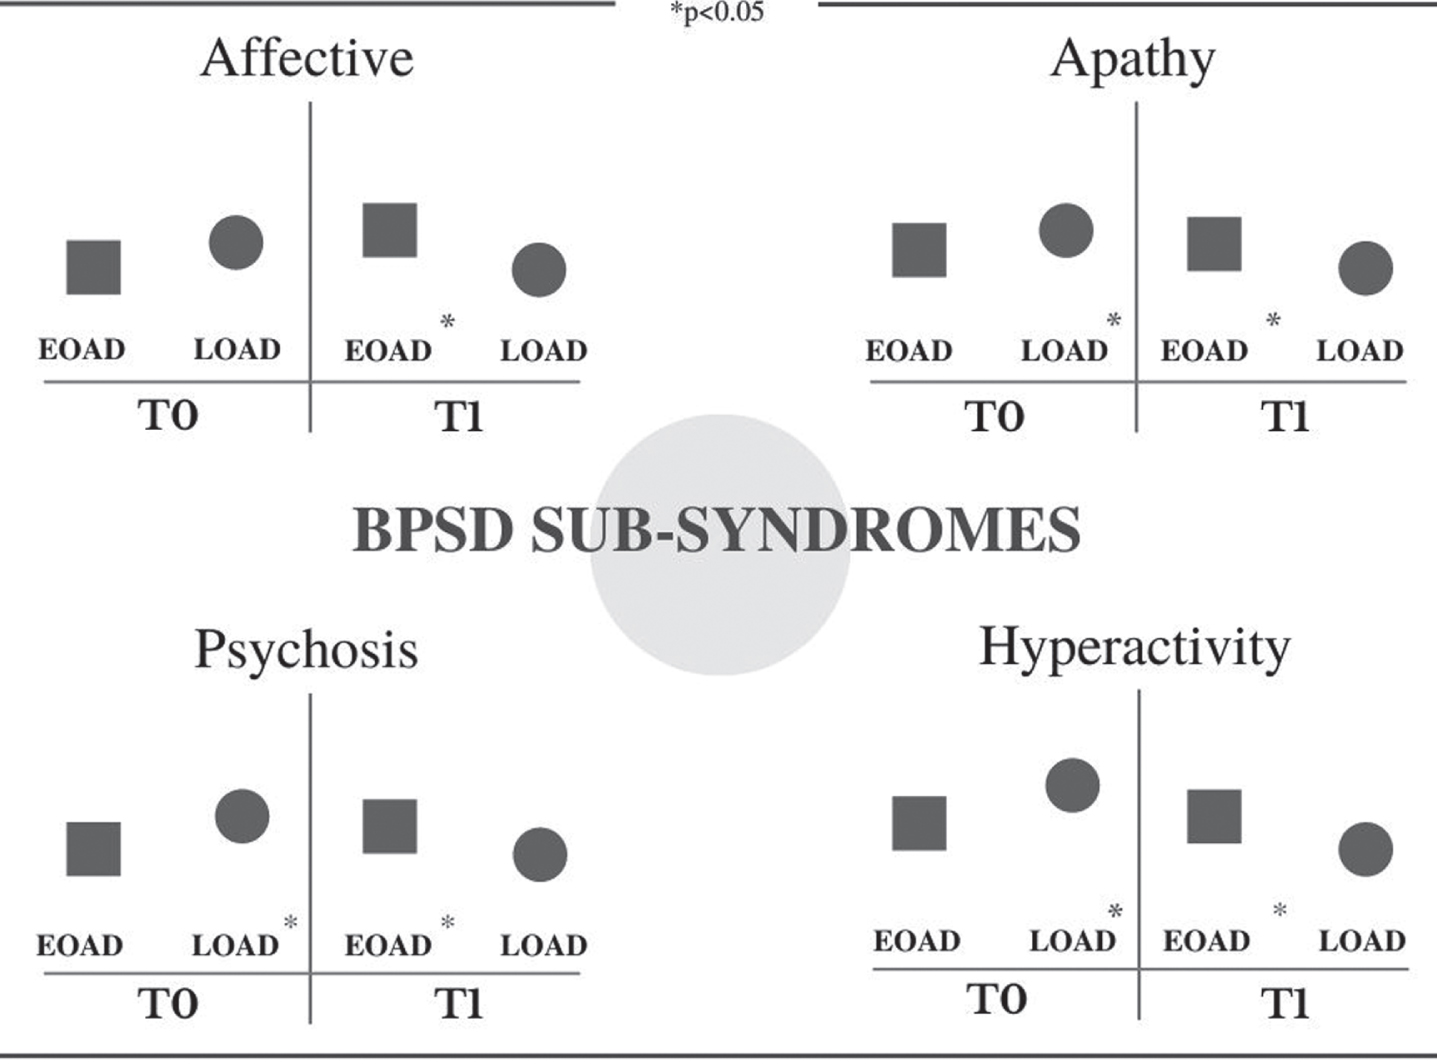 BPSD subsyndromes Prevalence at T0 and T1 in EOAD and LOAD groups.